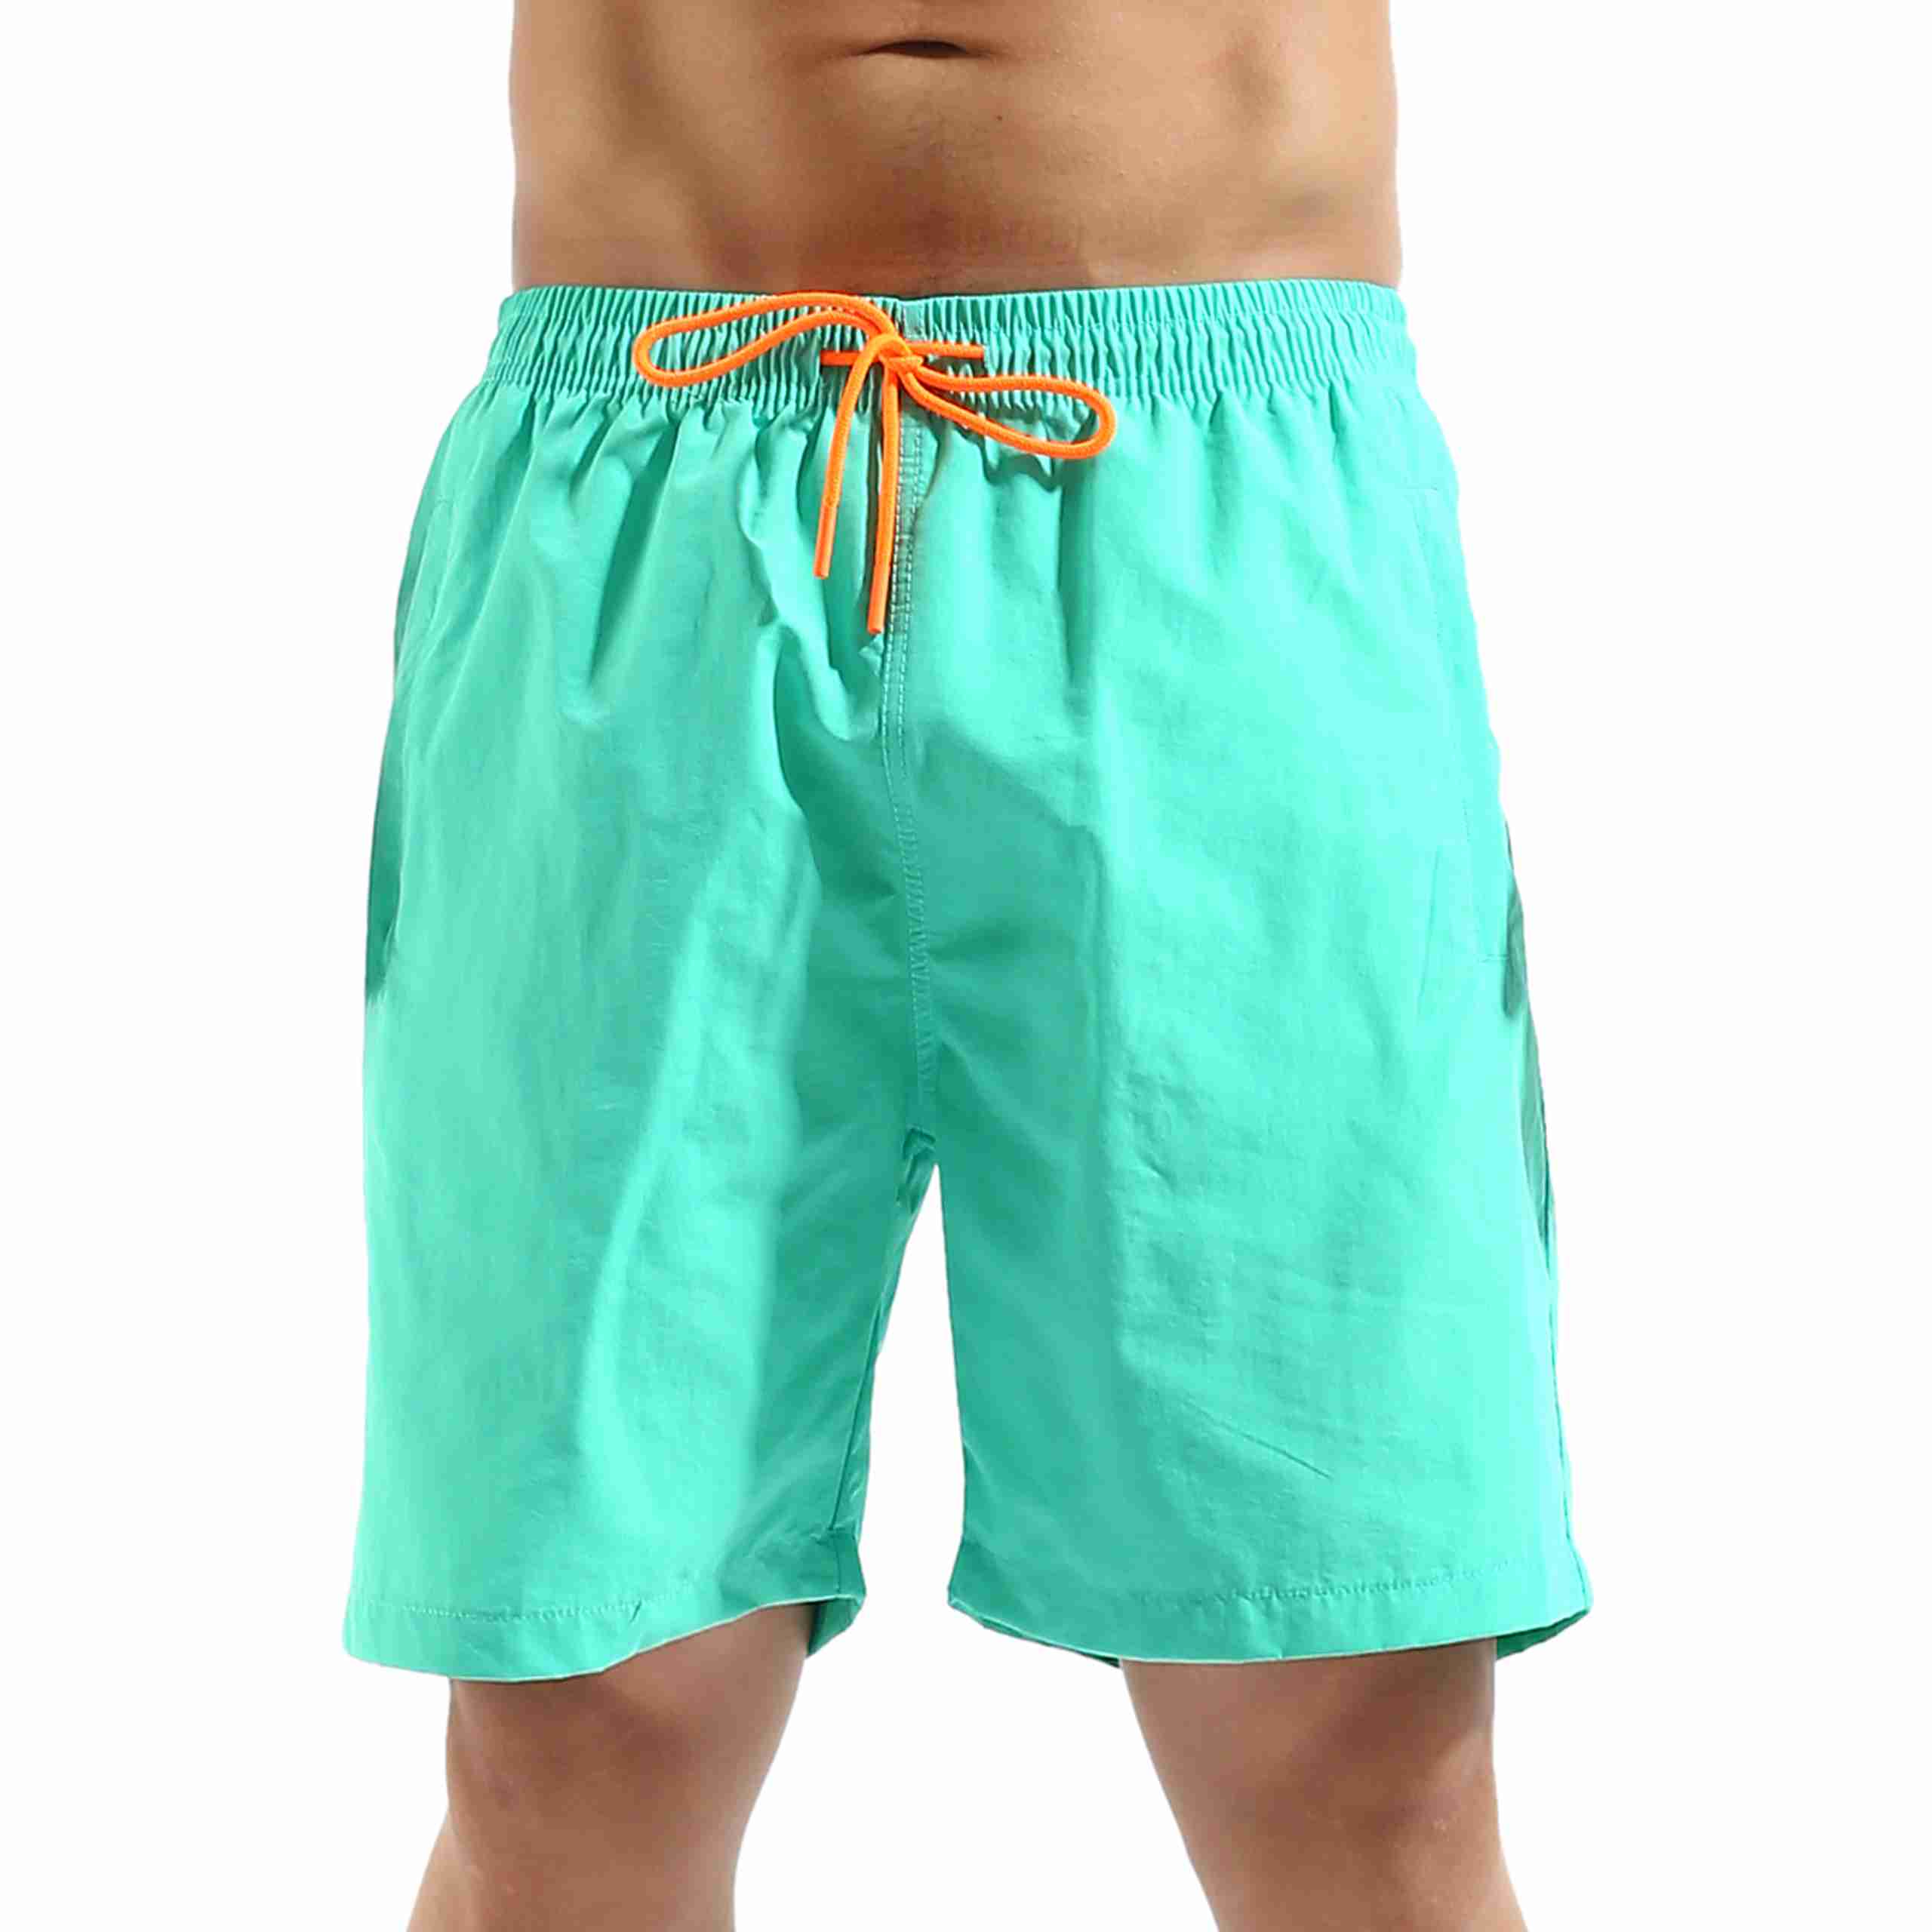 mens-swim-trunks-quick-dry-board-shorts-with-zipper-pockets with cash back rebate